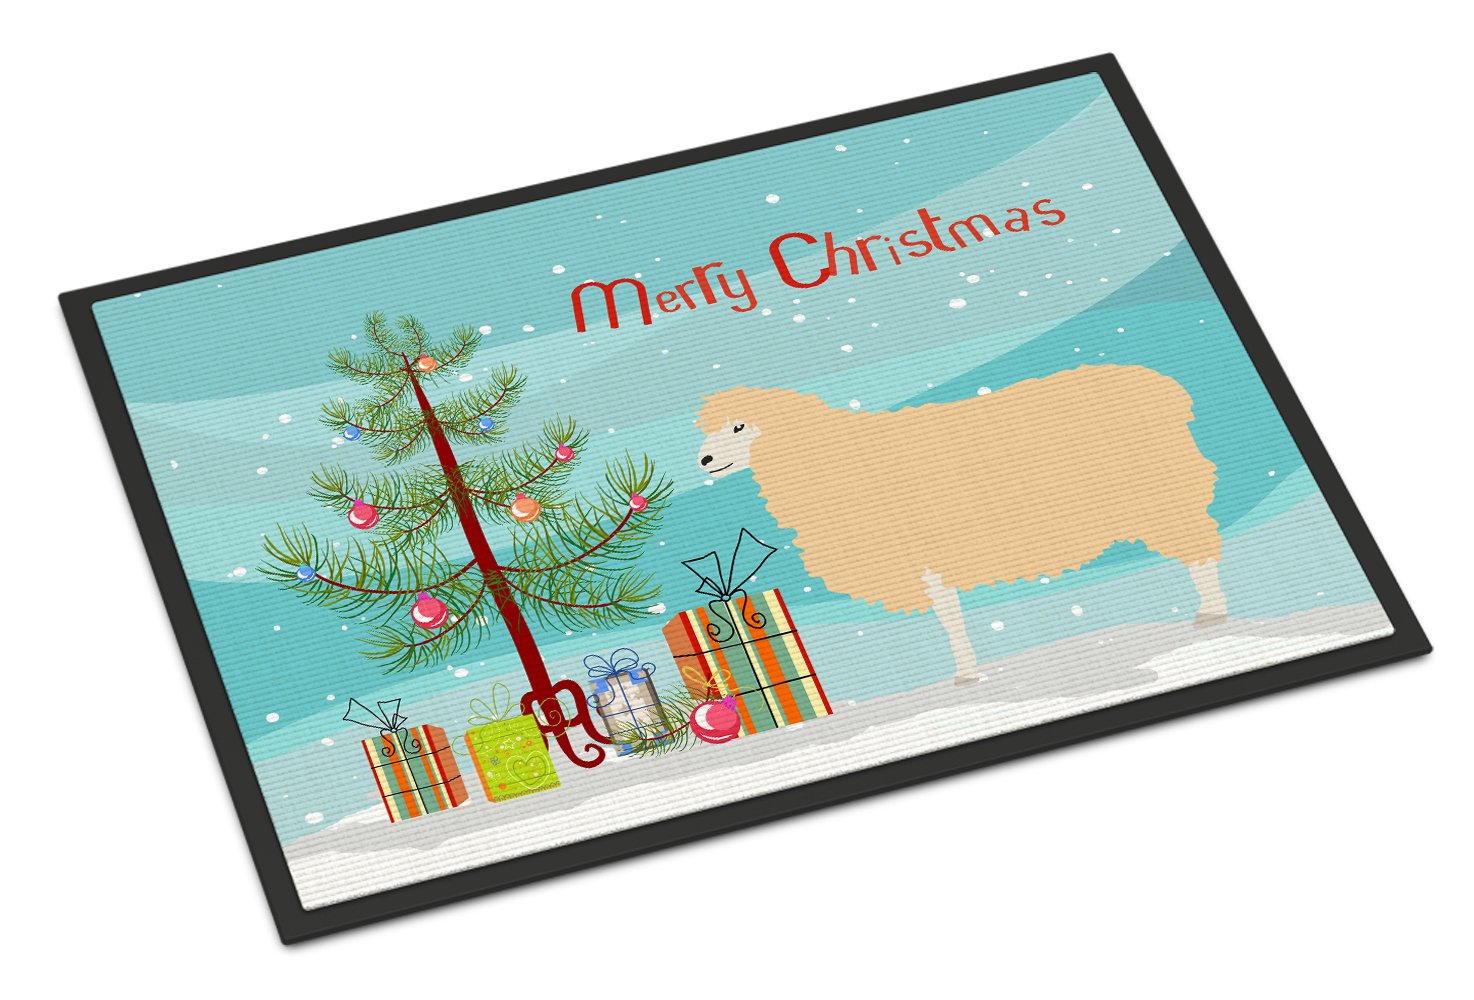 English Leicester Longwool Sheep Christmas Indoor or Outdoor Mat 24x36 BB9341JMAT by Caroline's Treasures